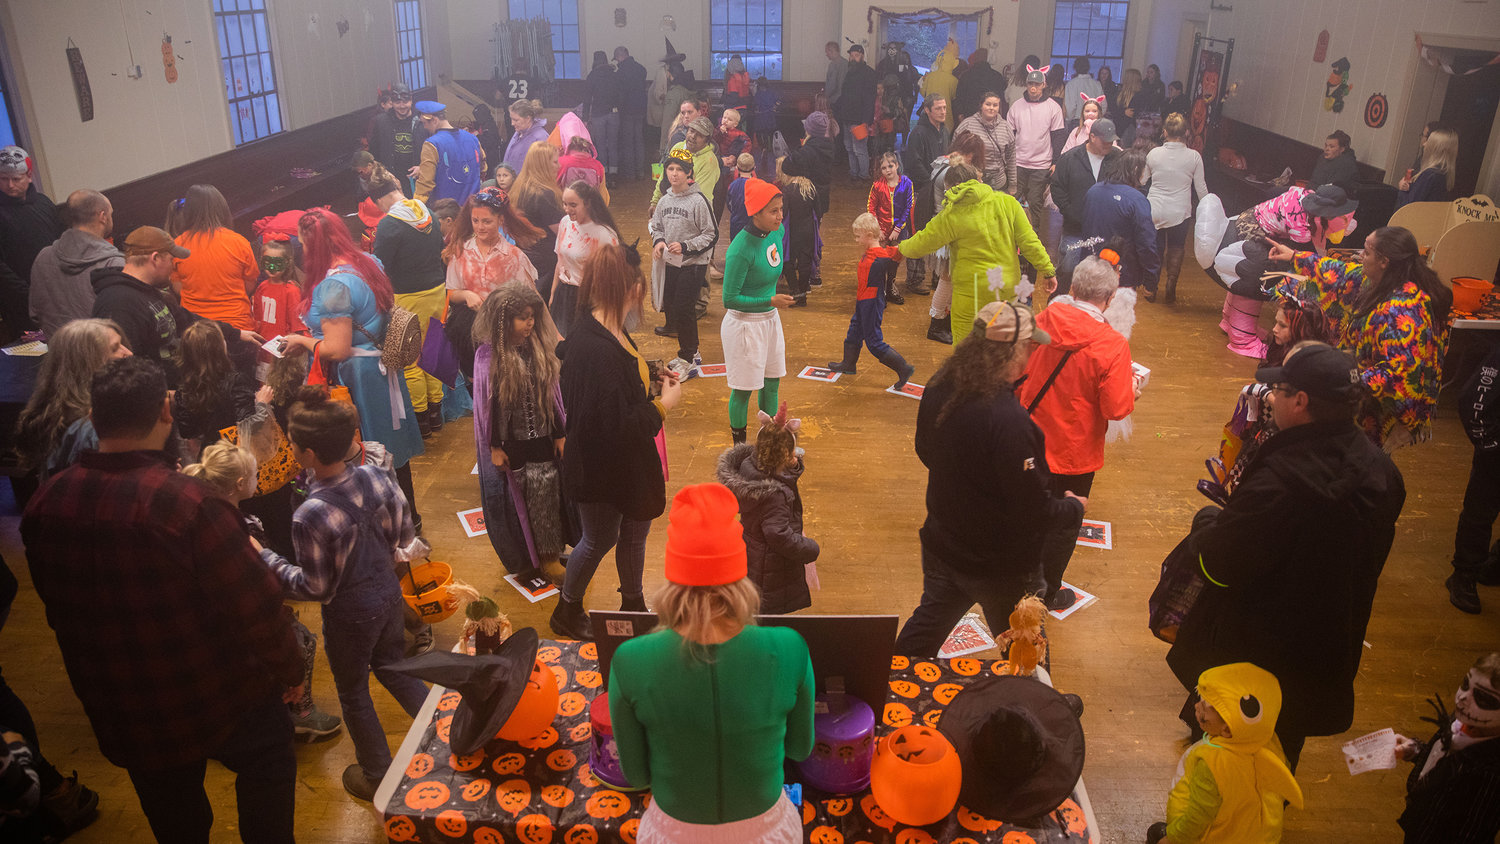 Visitors dressed in costume participate in a cake walk at the Winlock Community Building during Egg-O-Lantern festivities on Halloween.